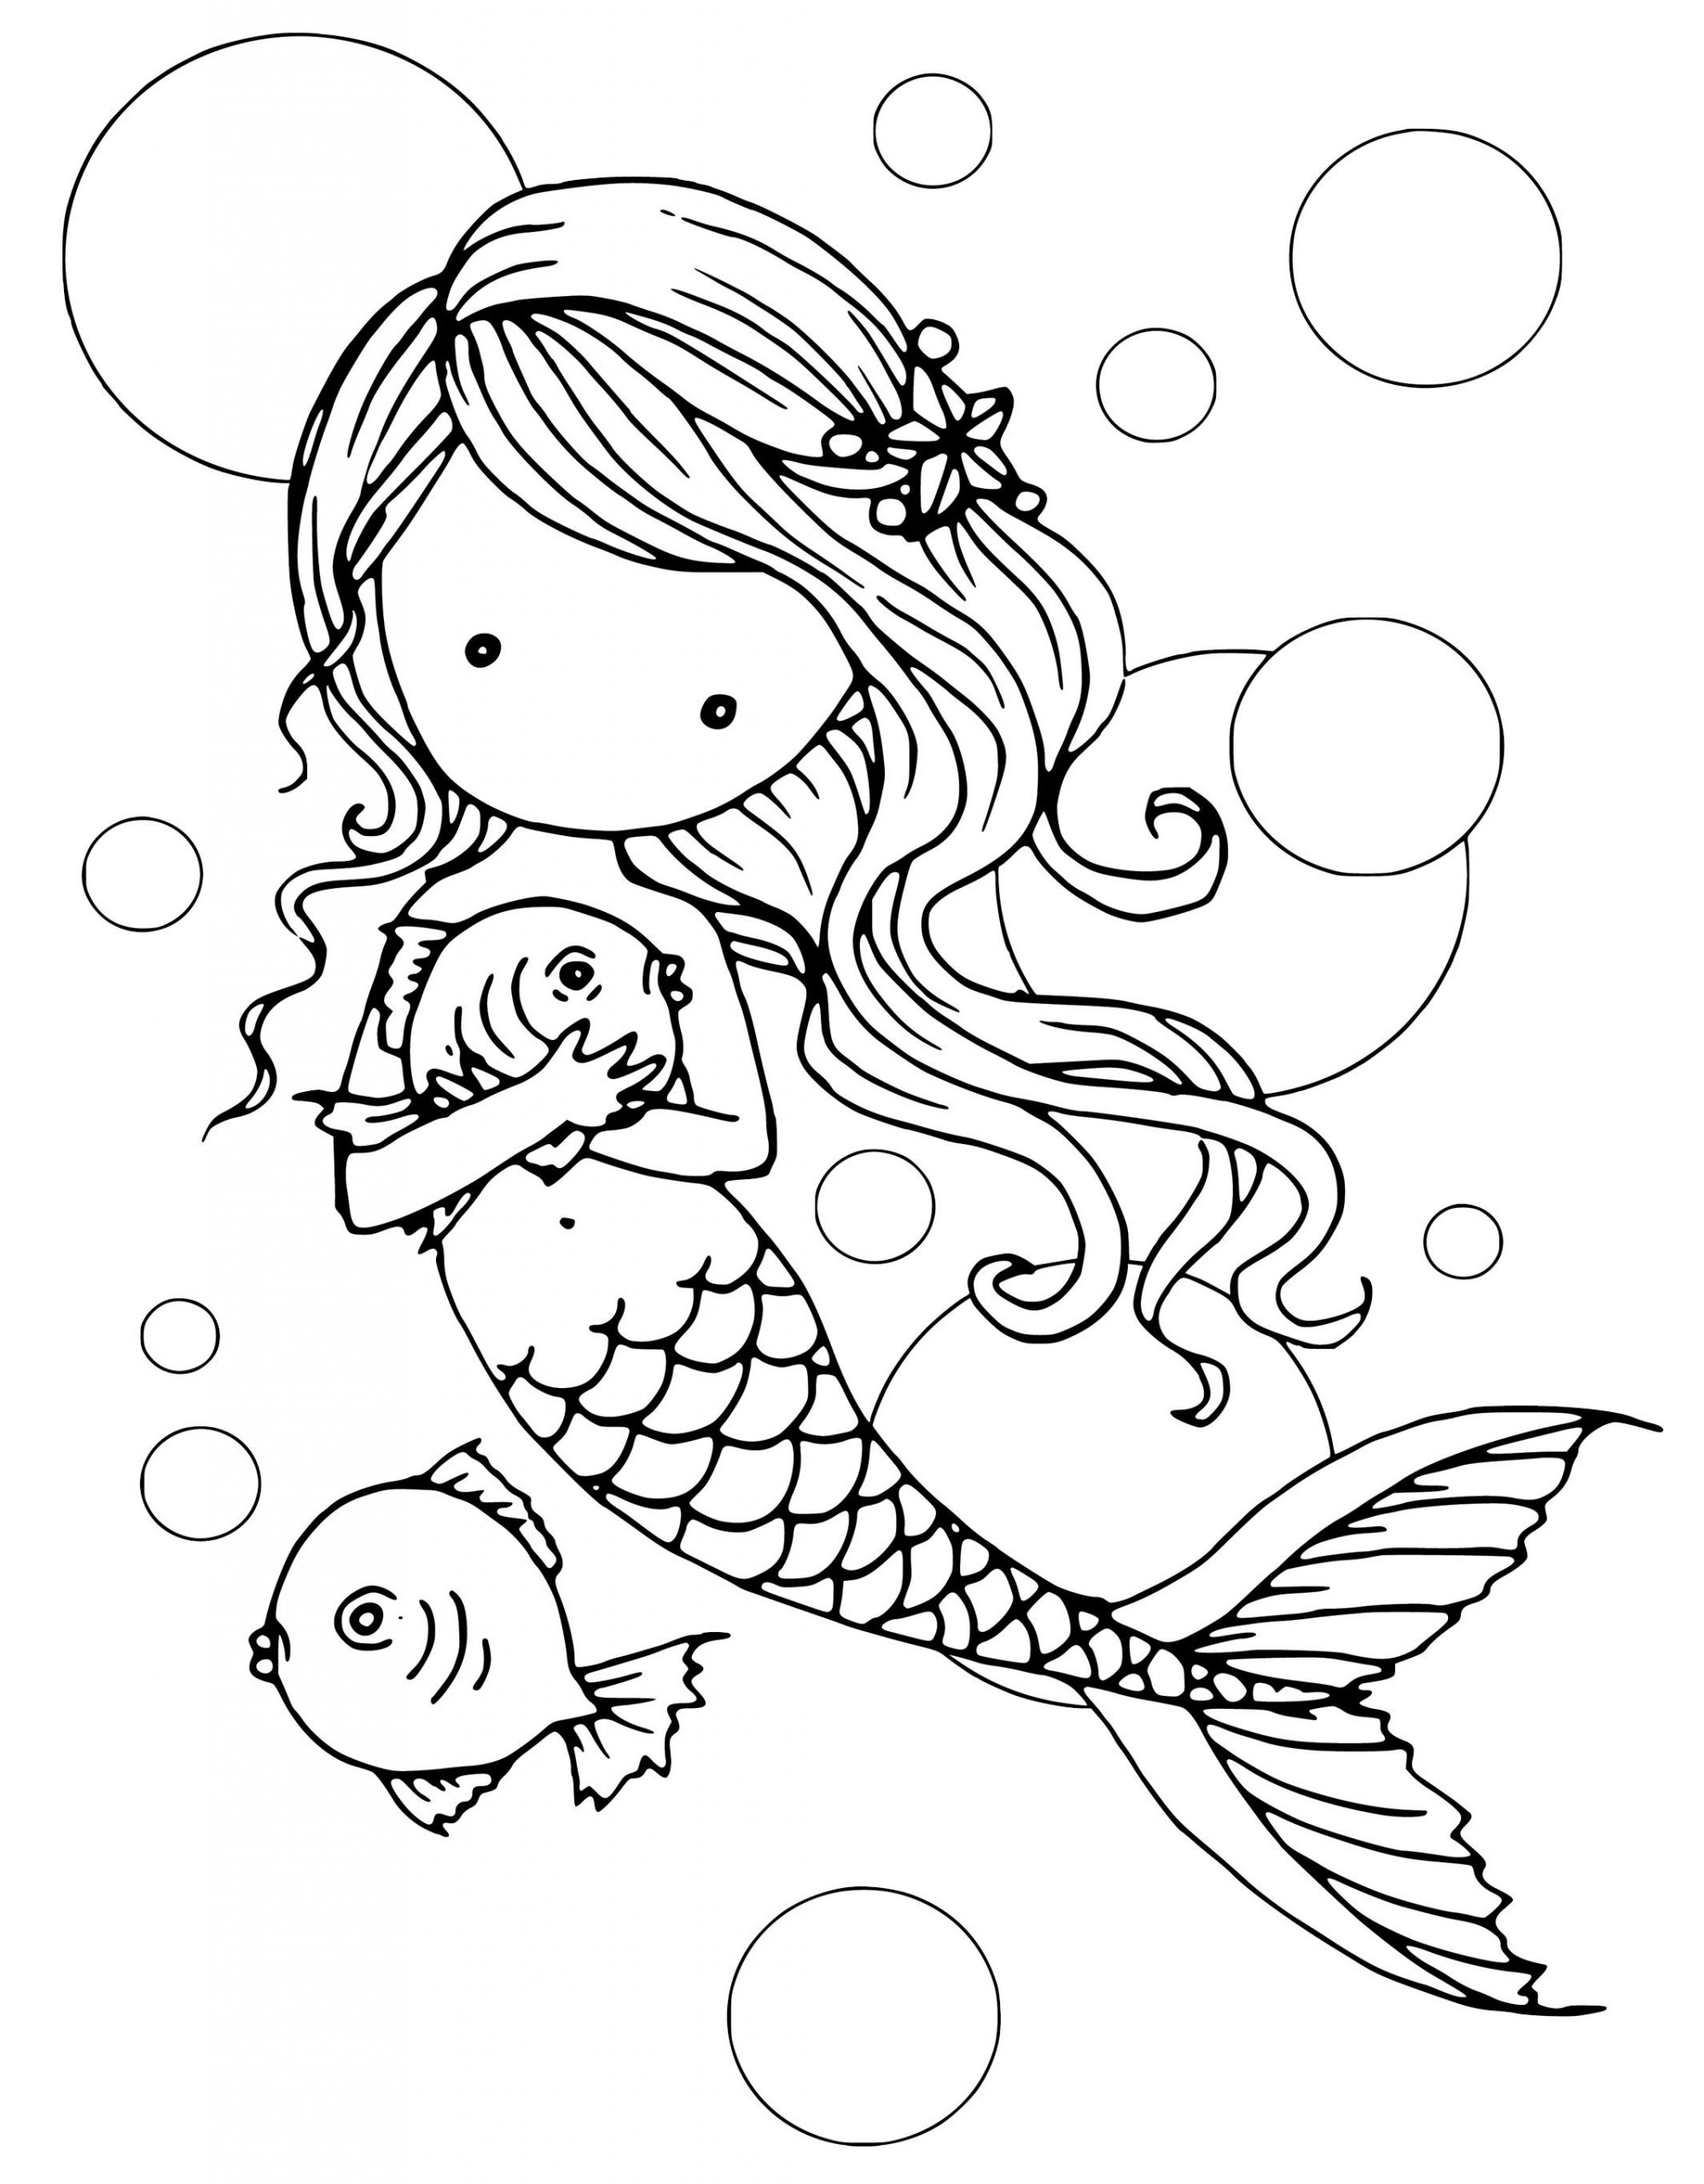 The Little Mermaid Coloring Pages Free To Print Printable For Kids ...